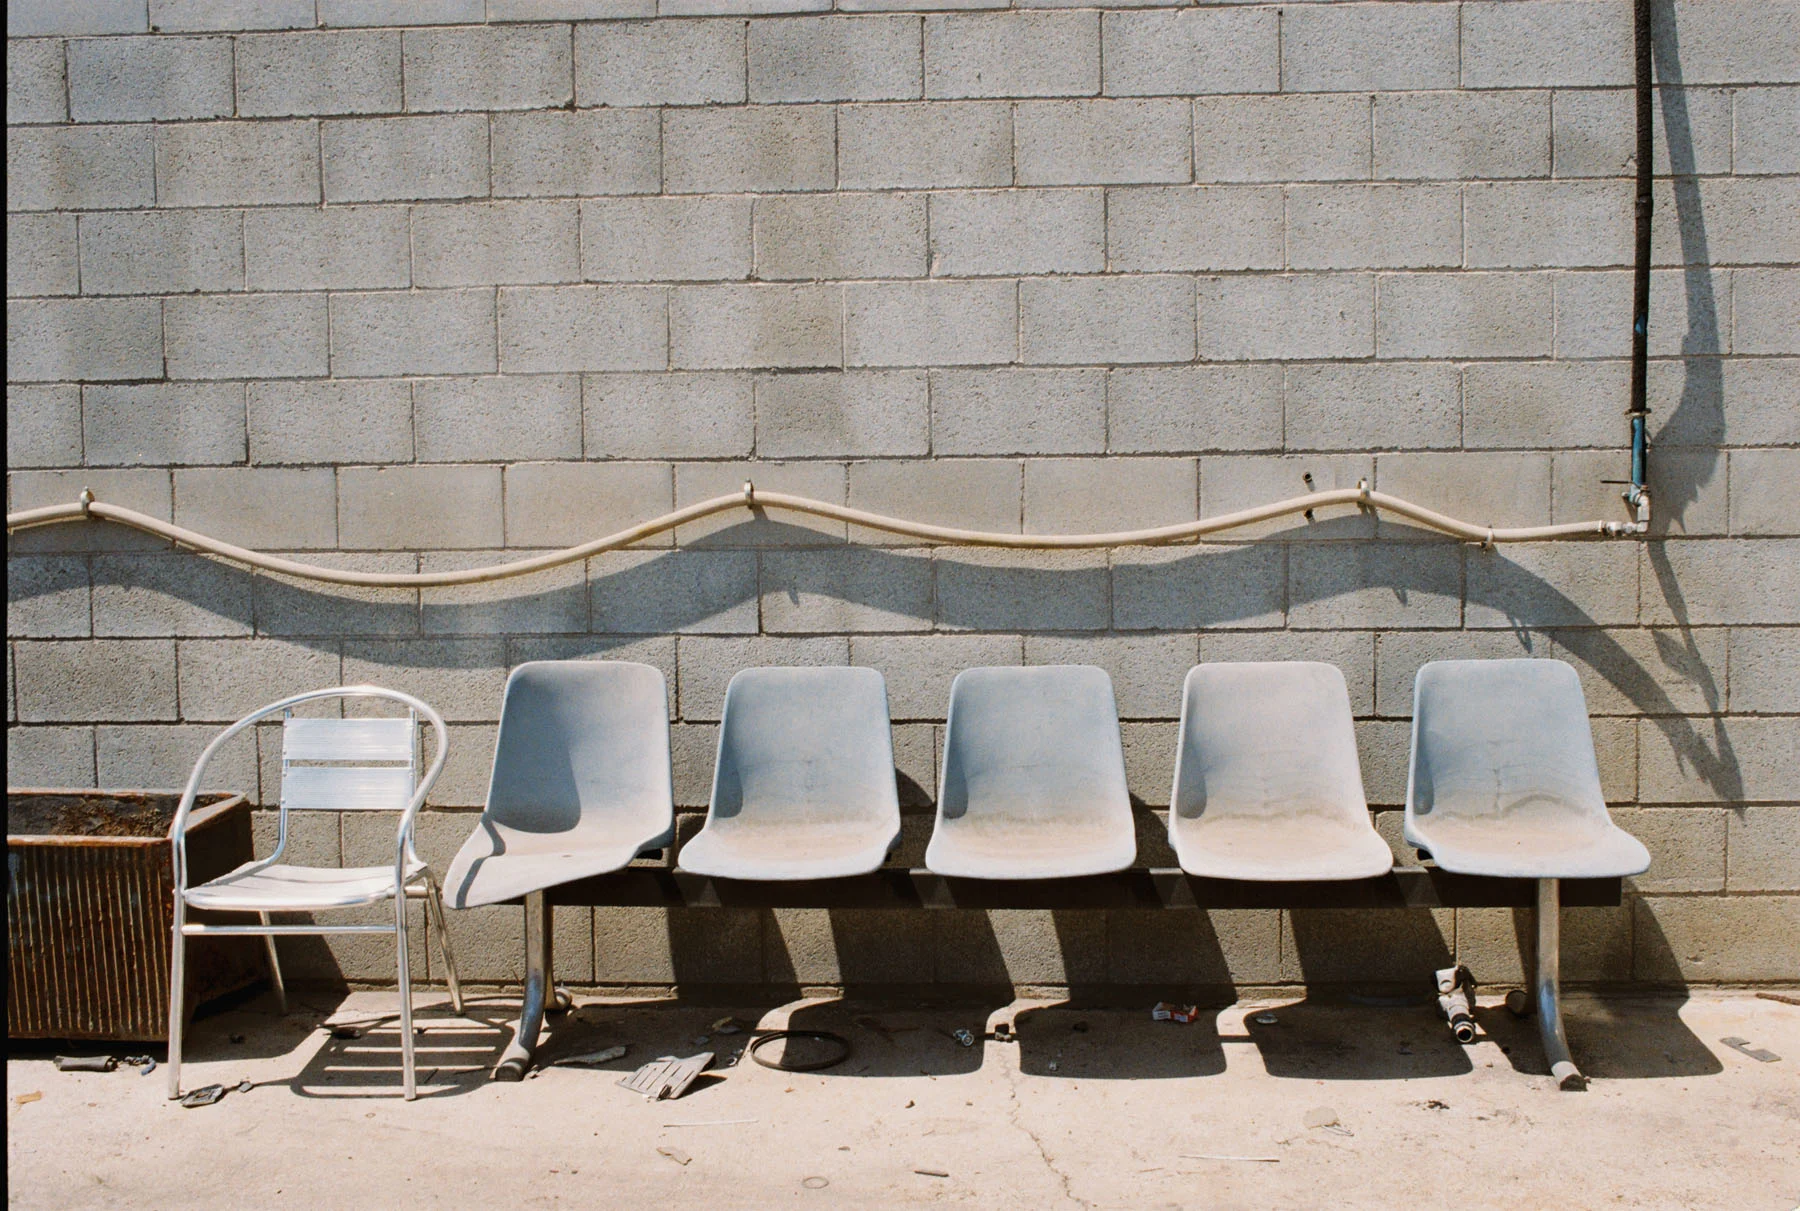 A photograph of five blue chairs laying in an empty backyard. Another metal chair sits beside them. In the background is a grey brick wall with pipes and hoses attached to it.